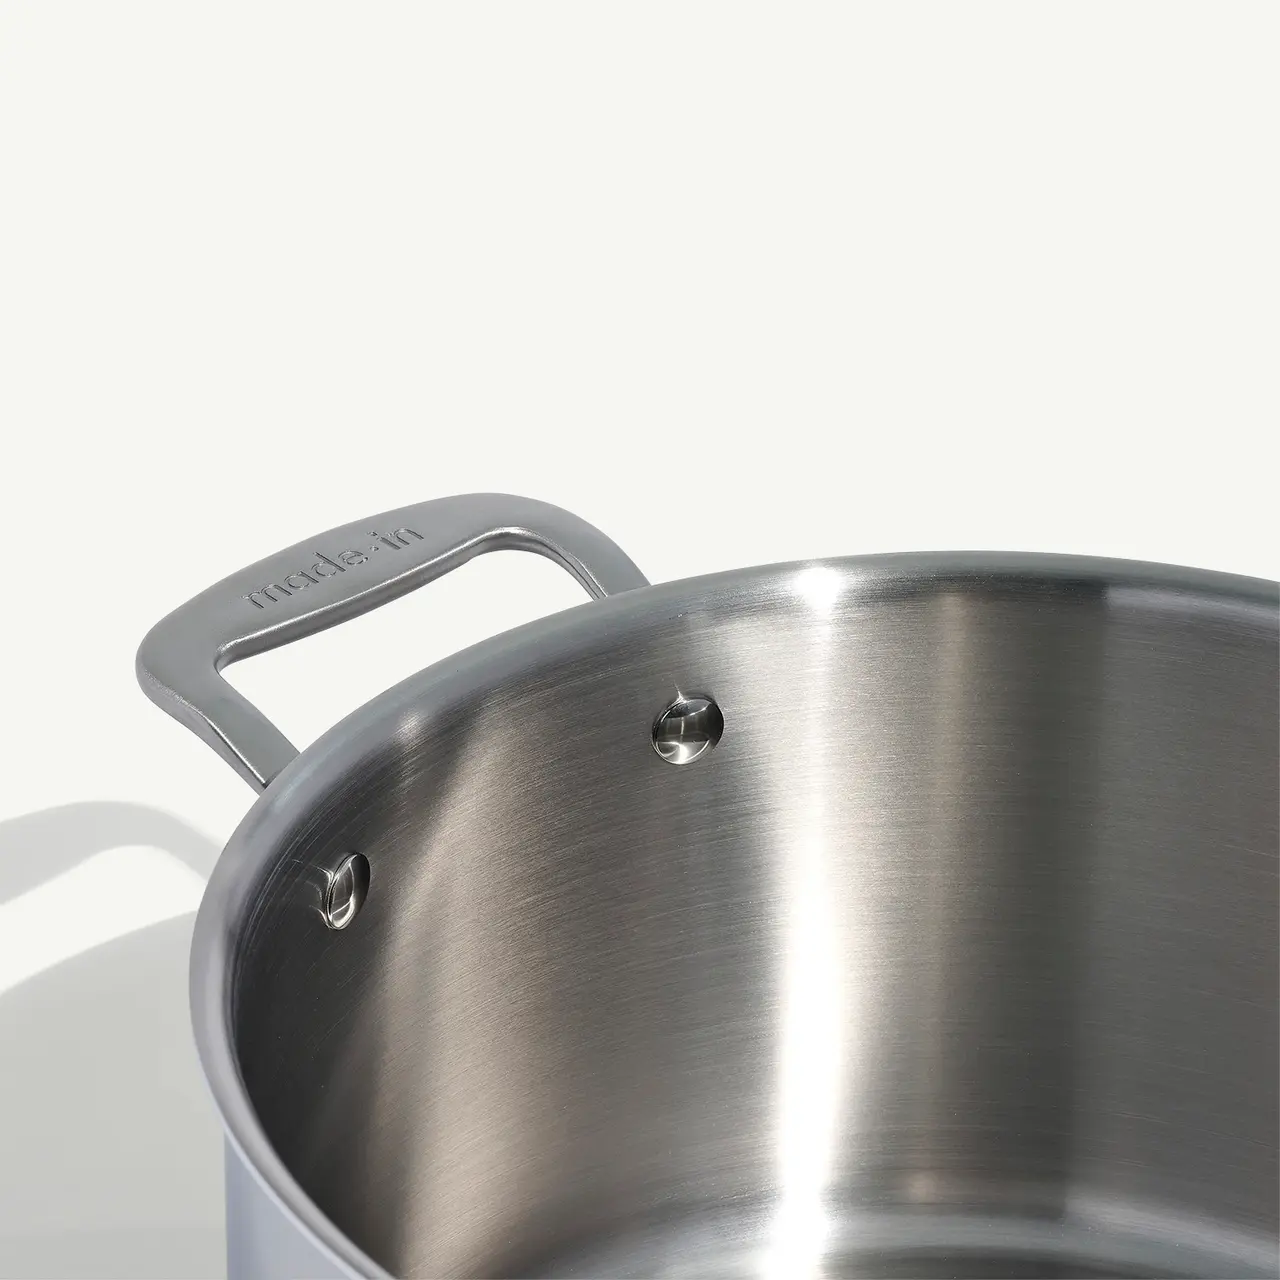 A close-up of a stainless steel pot showing a riveted handle with the brand name.